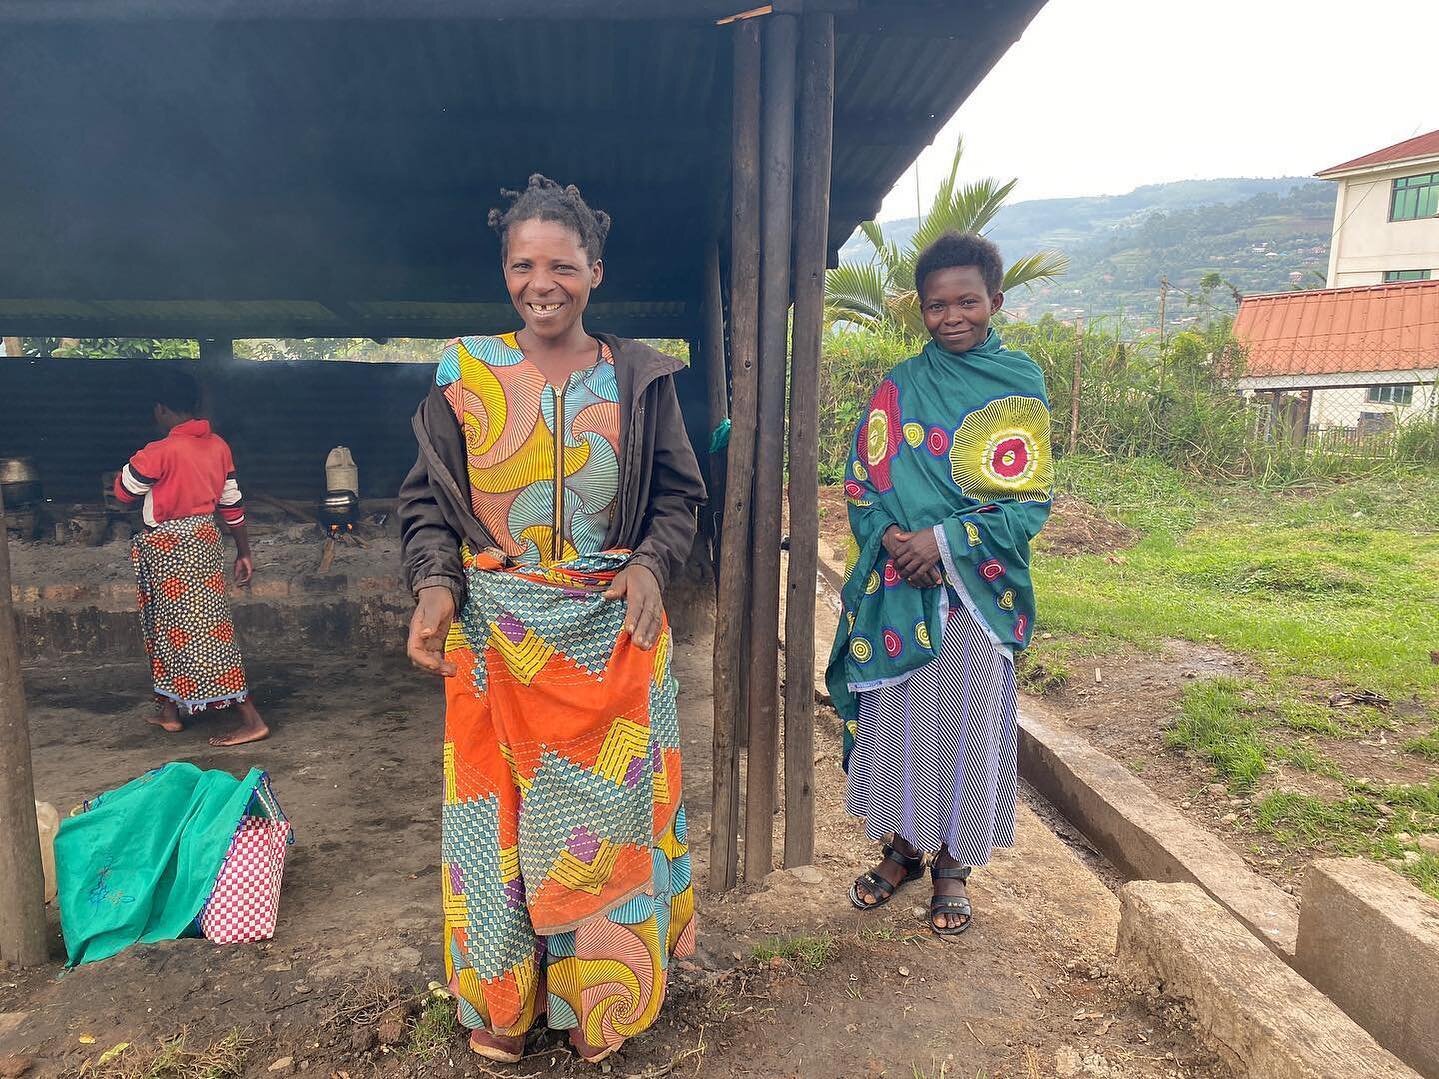 &quot;I heard a noise coming from the shed. The ladies were clapping and smiling from ear to ear - saying thank you to God for the new running water!&quot;- Brad Harrison, Founder of @goodgaali shares the latest update of our current partner organiza